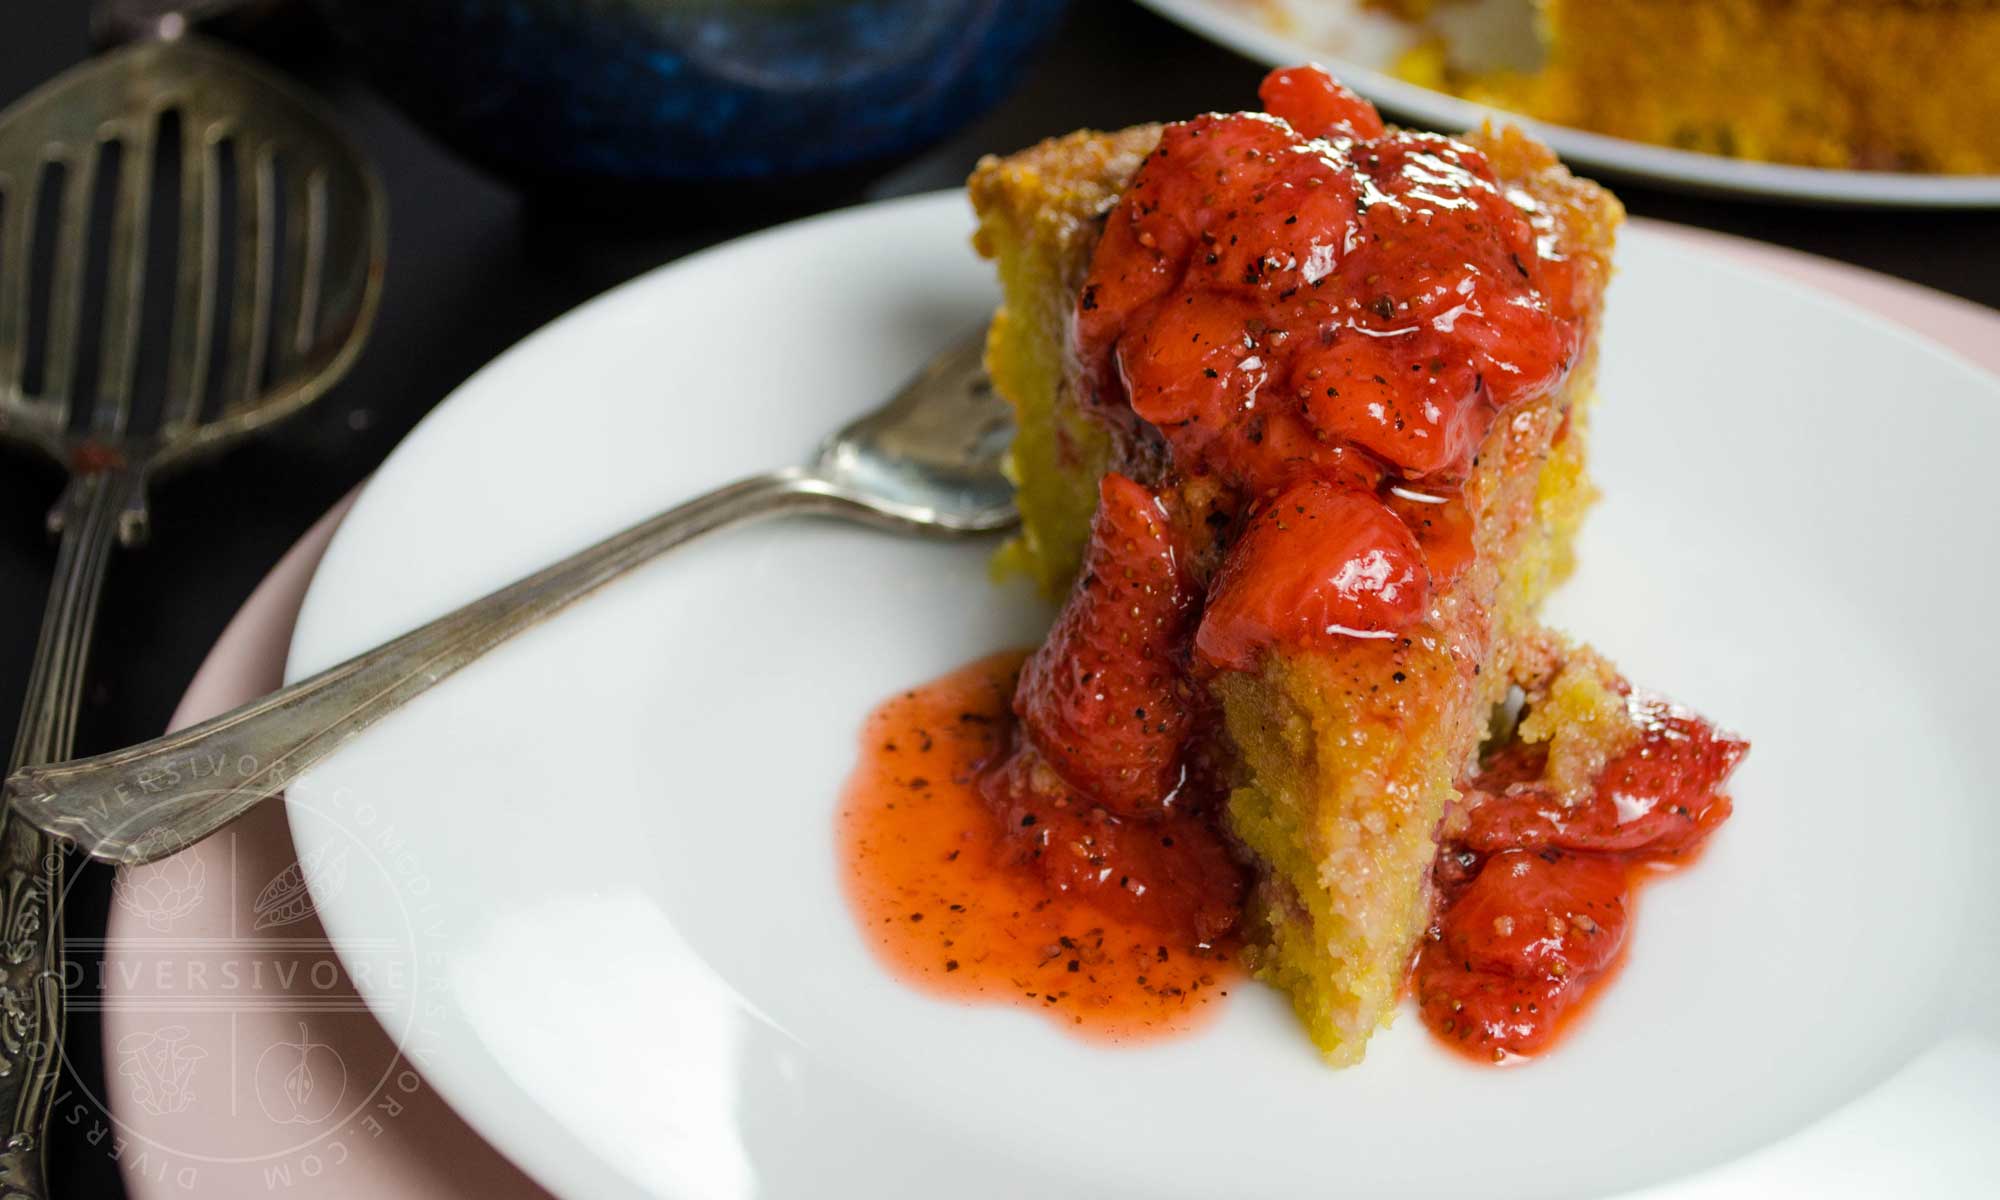 Featured image for “Strawberry Polenta Cake with Strawberry Black Pepper Sauce”